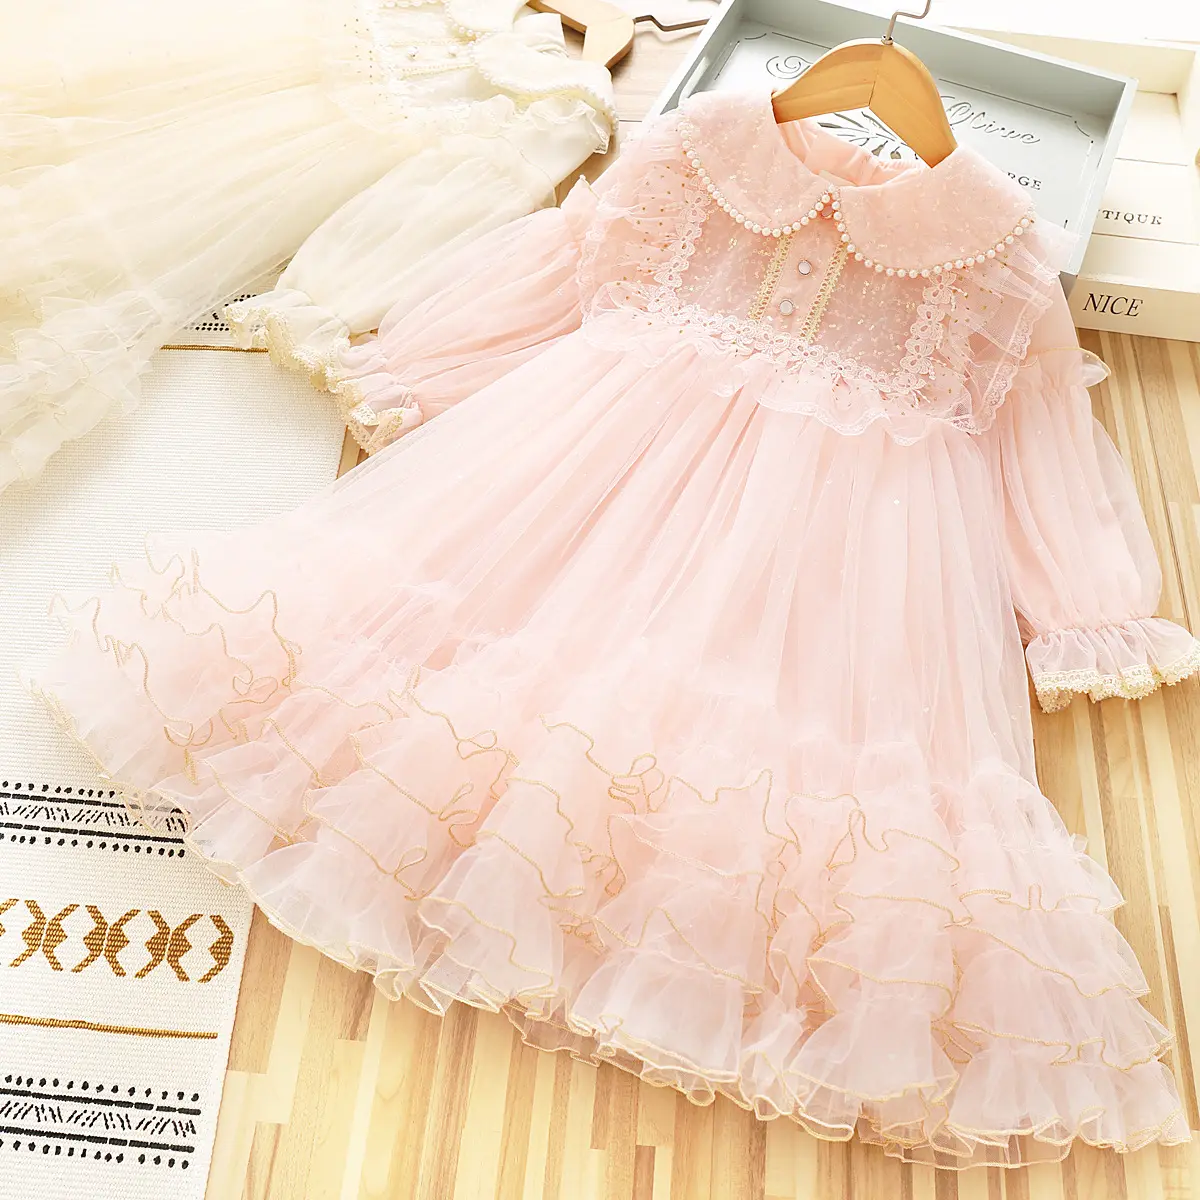 2023 spring boutiques little baby girls tutu dresses infant toddler kids pink lace ruffles dress princess party clothing 1111